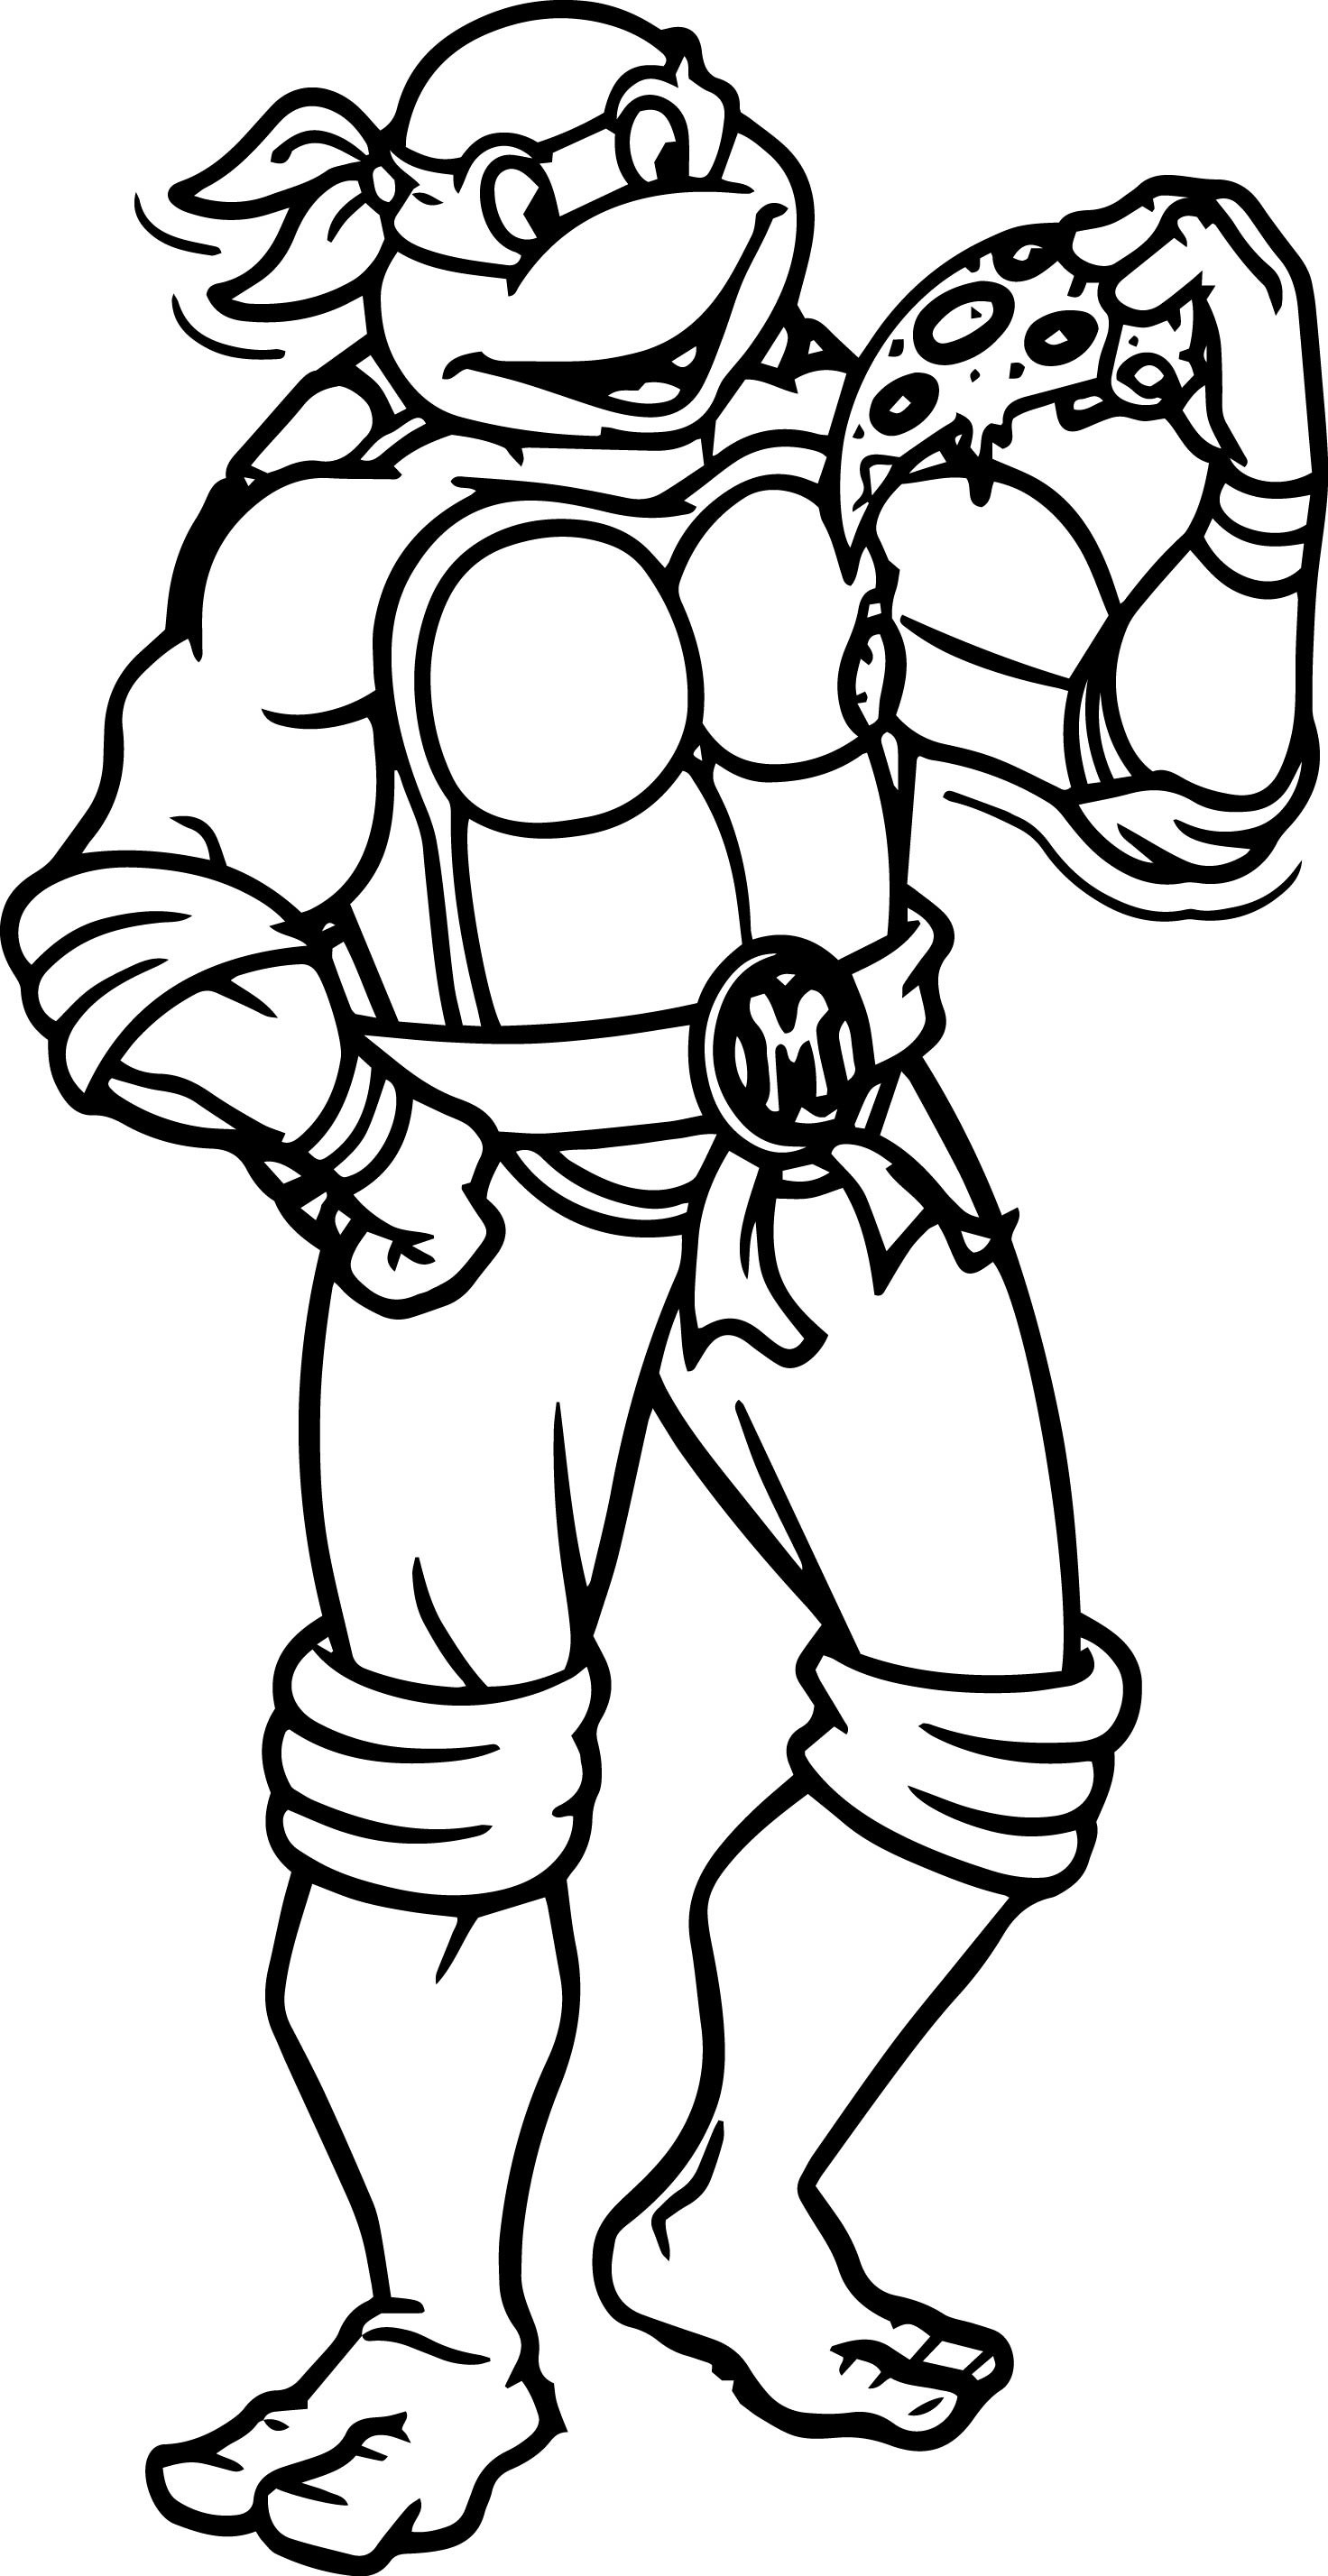 Free Coloring Pages For Boys Turtle
 Teenage Mutant Ninja Turtle Coloring Pages coloringsuite